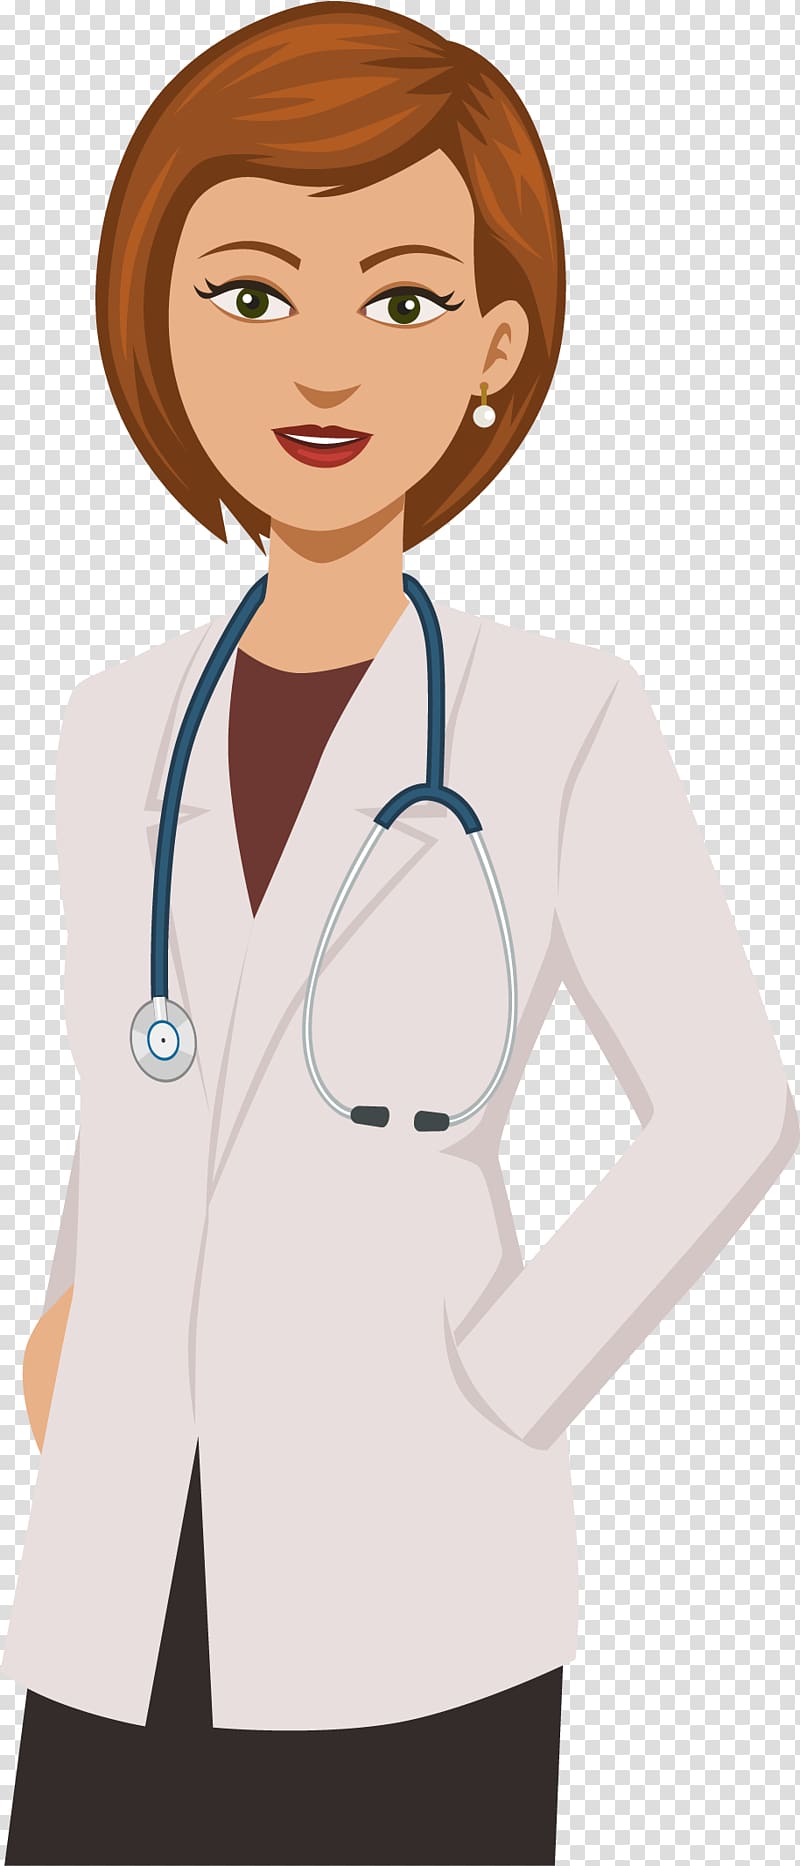 female doctor illustration, Cartoon Network Physician Adventure Time, Cartoon female doctor transparent background PNG clipart